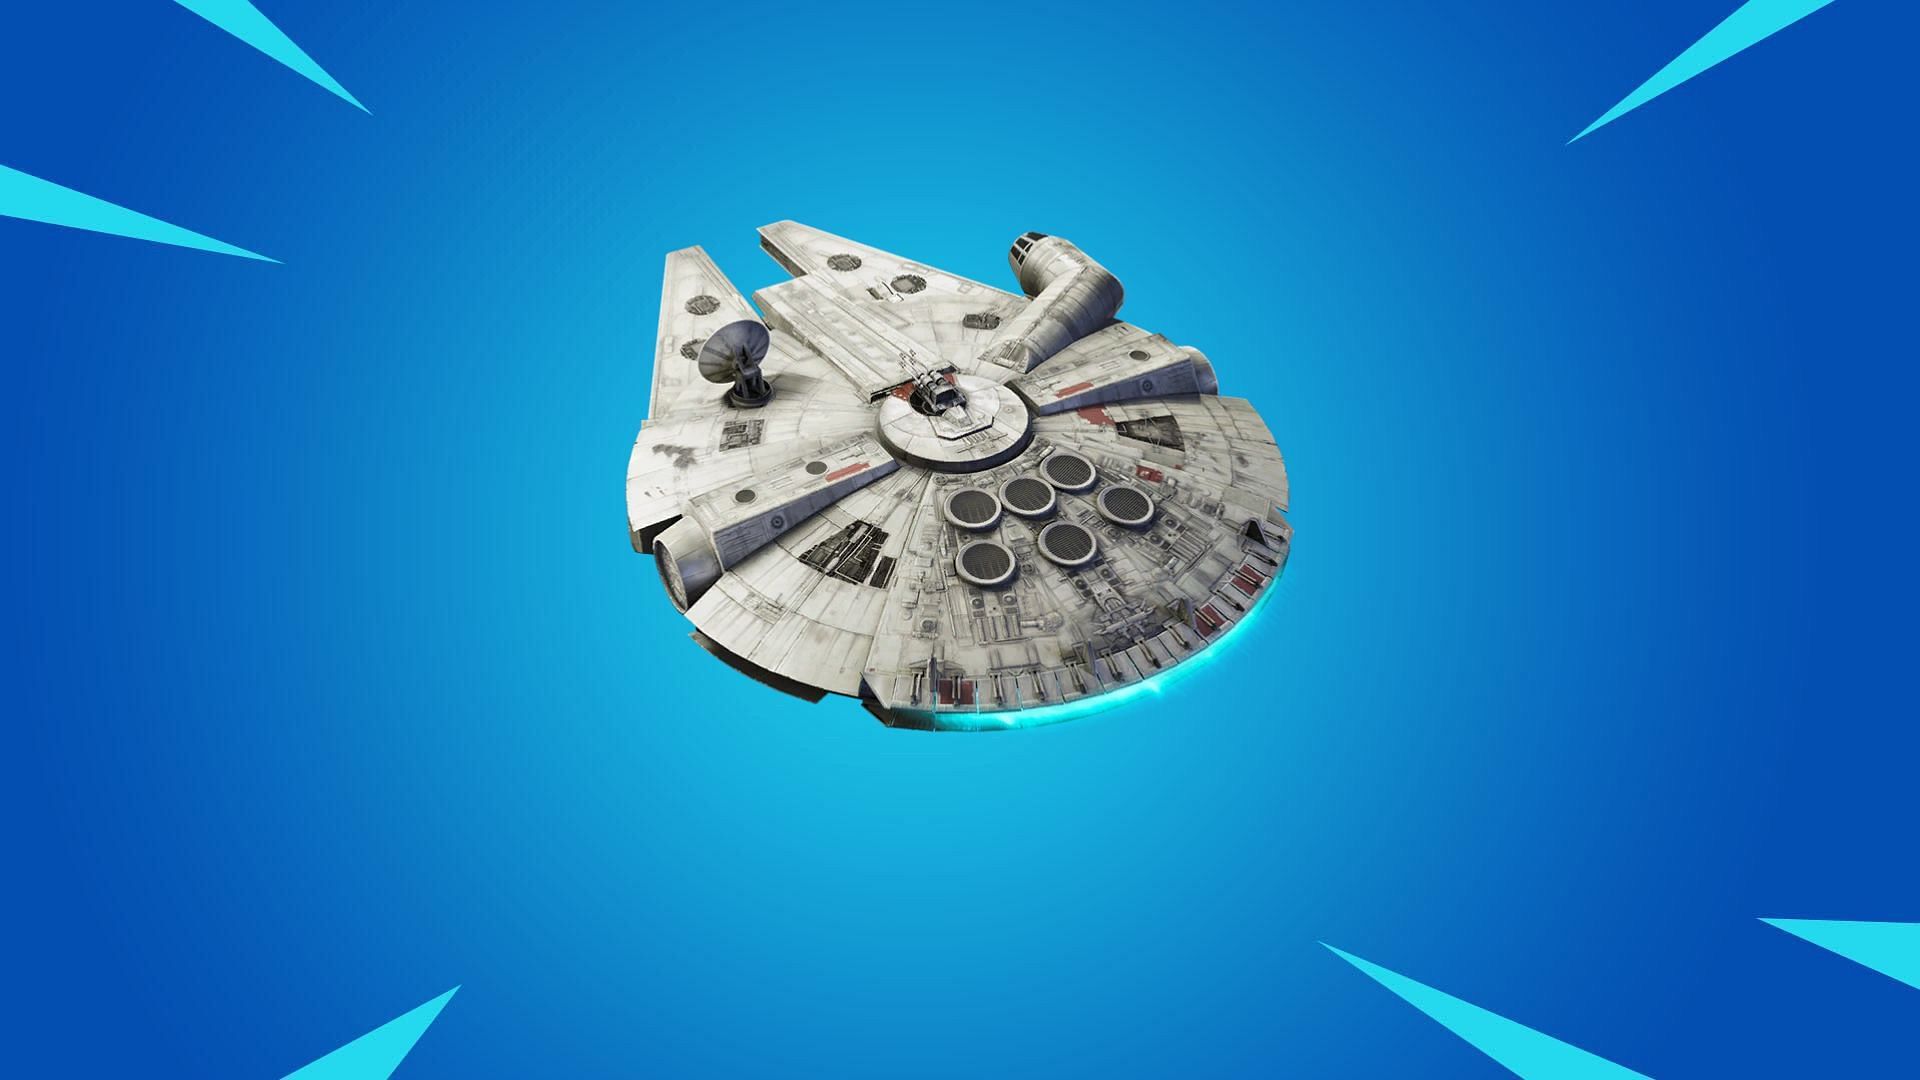 &quot;I forgot how blinding the animation is&quot;: Fortnite community wants Millenium Falcon glider to return to the game